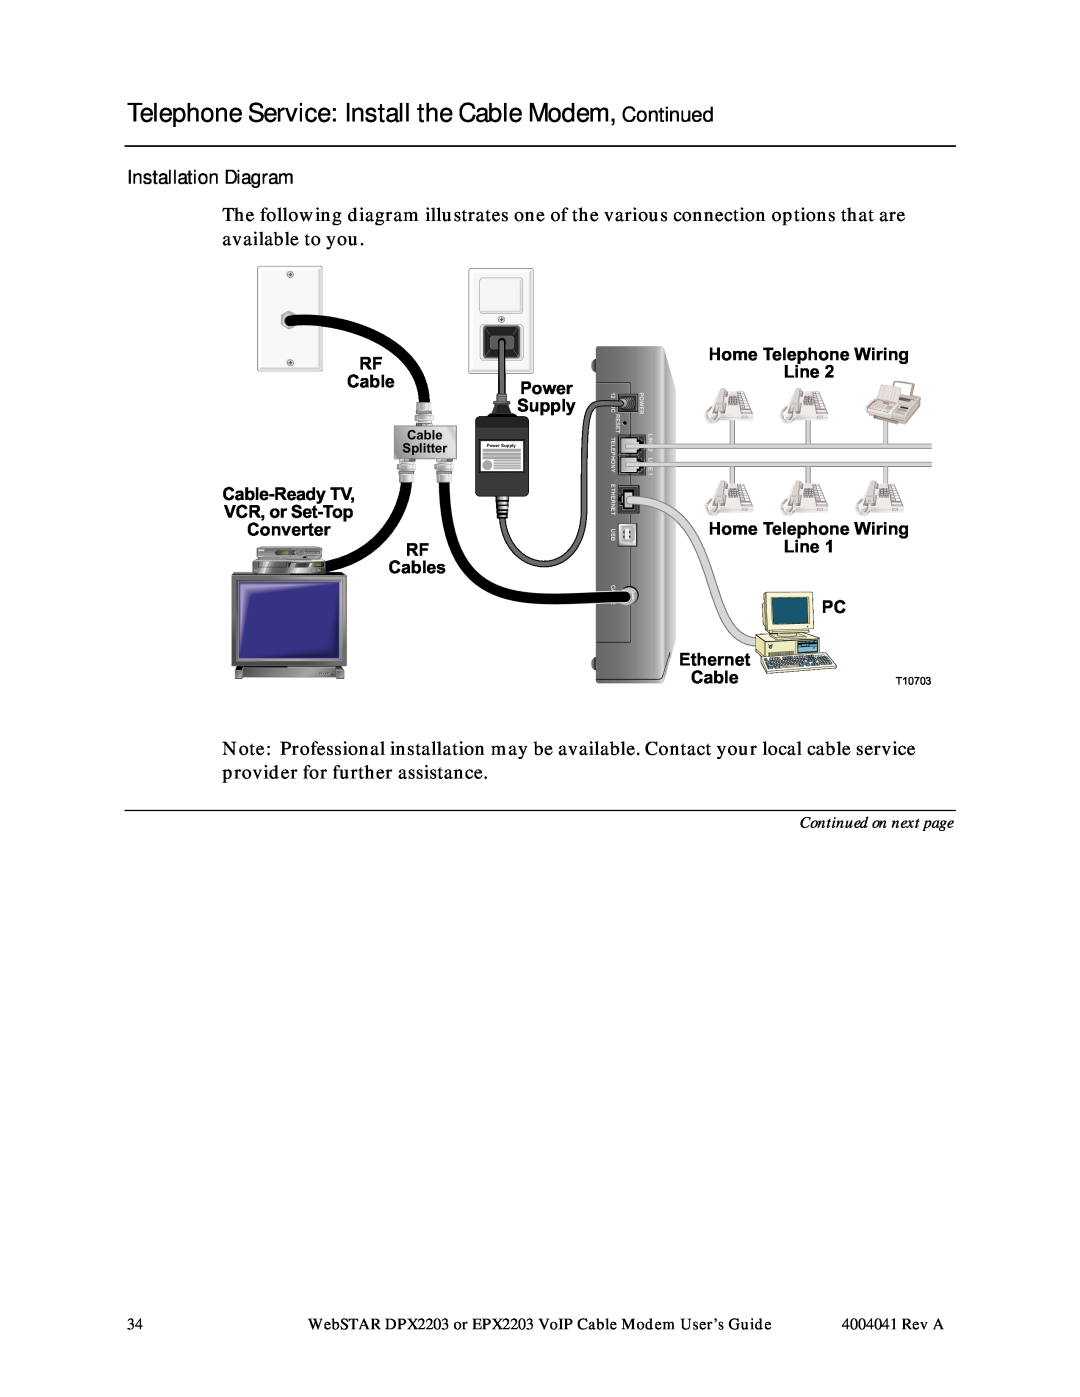 Scientific Atlanta EPX2203, DPX2203 manual Telephone Service Install the Cable Modem, Continued, Installation Diagram 